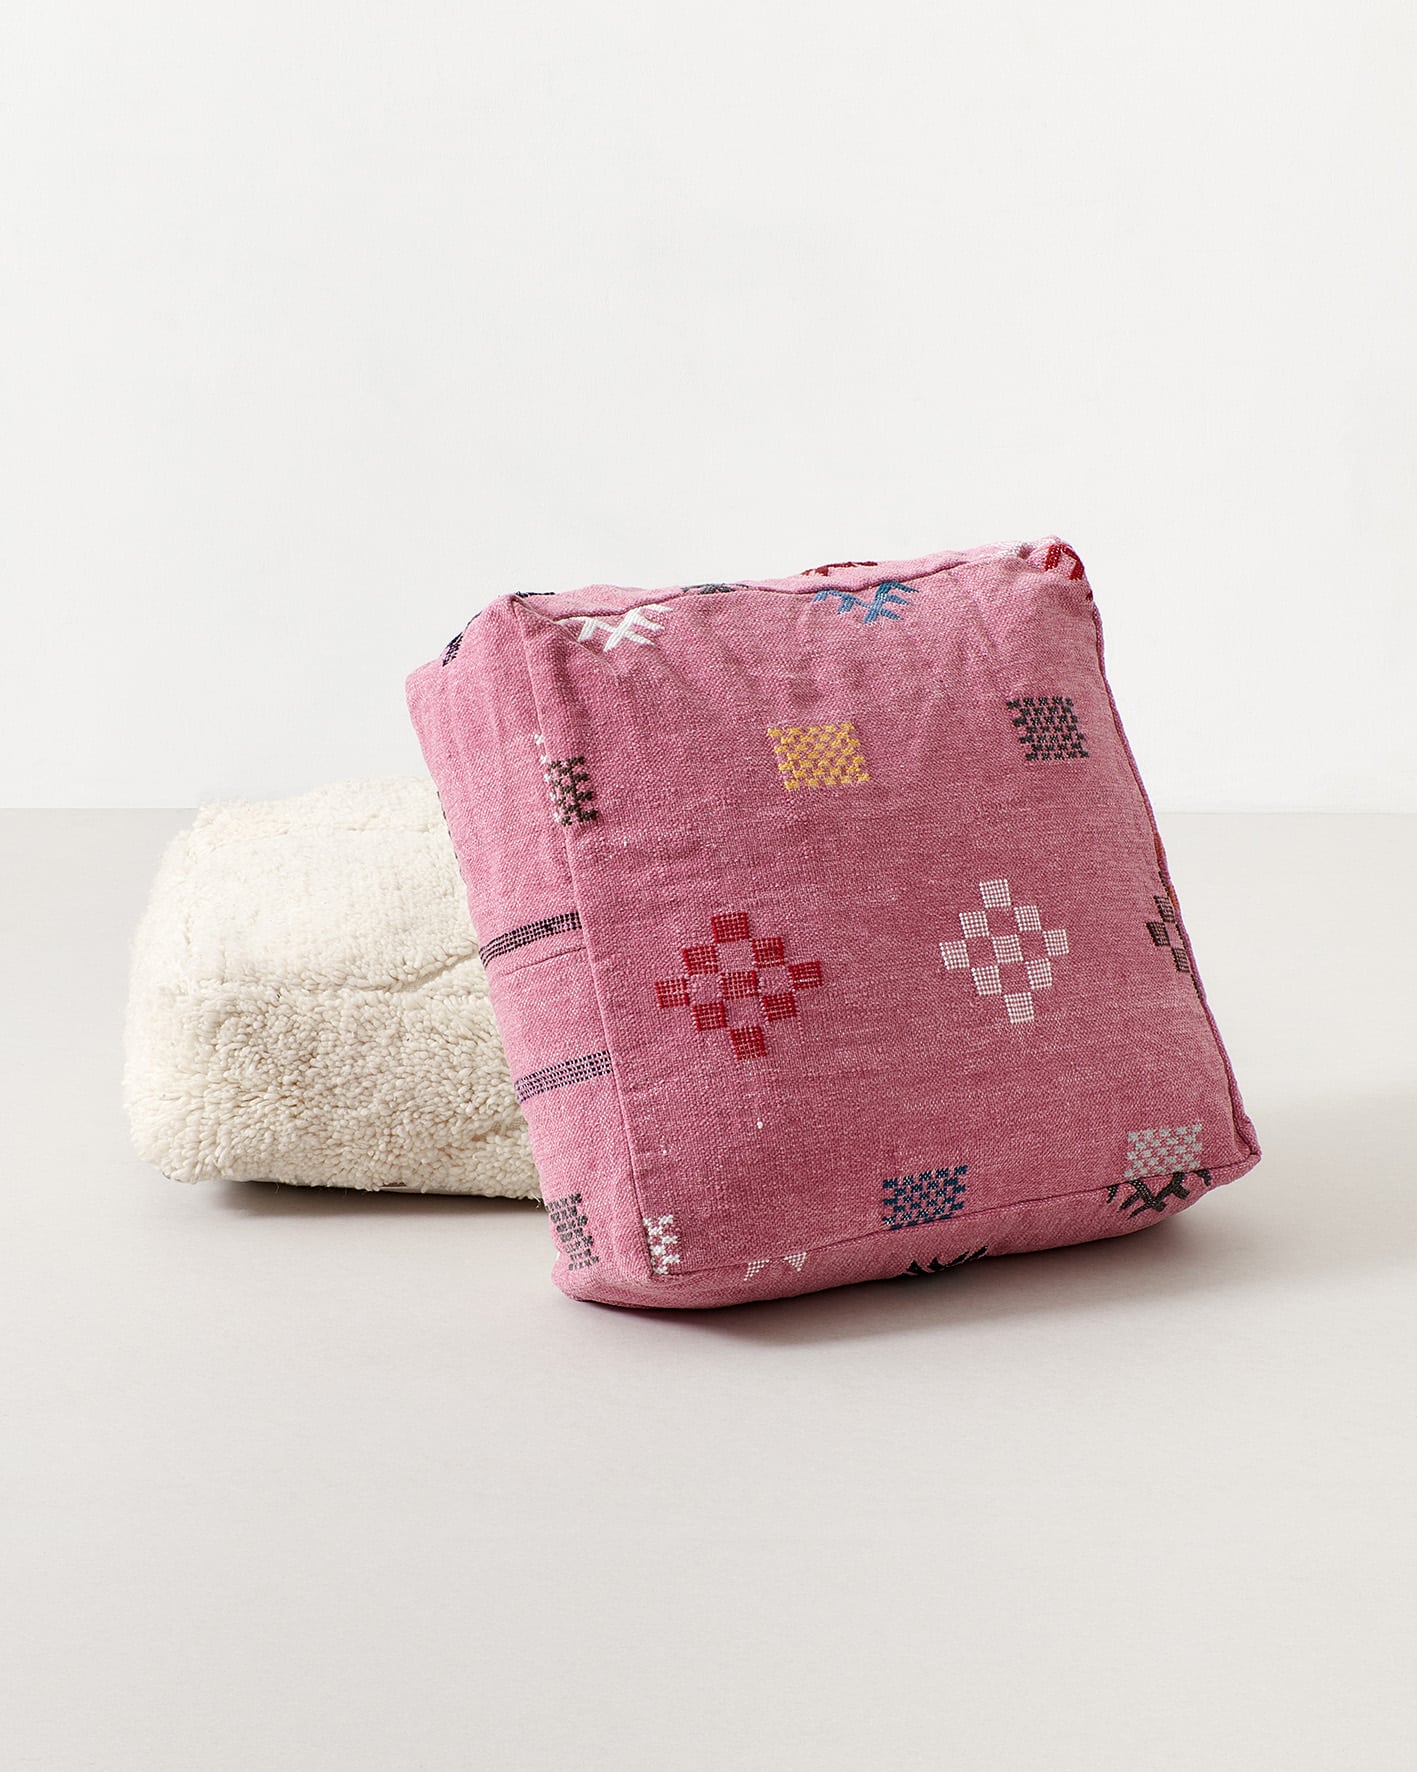 Pink pouf with colourful pictograms